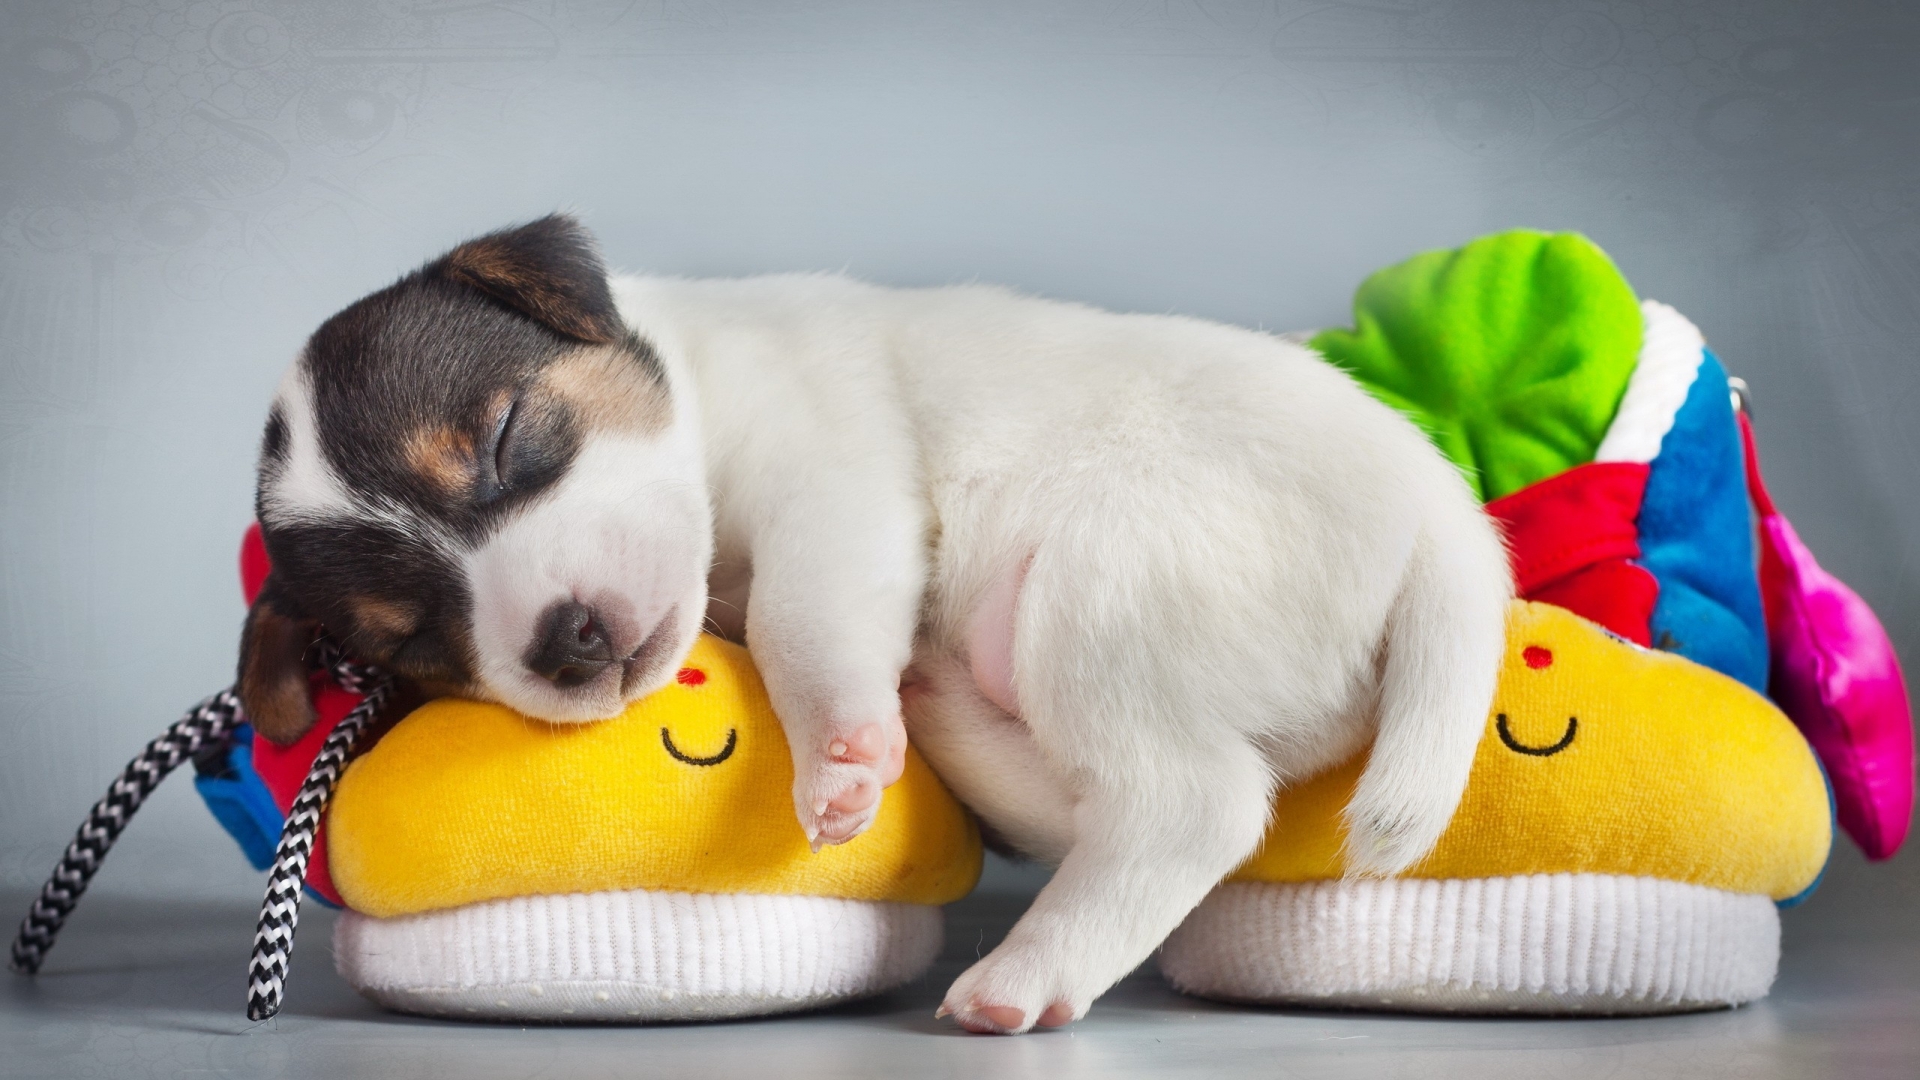 Cute Puppy Sleeping for 1920 x 1080 HDTV 1080p resolution